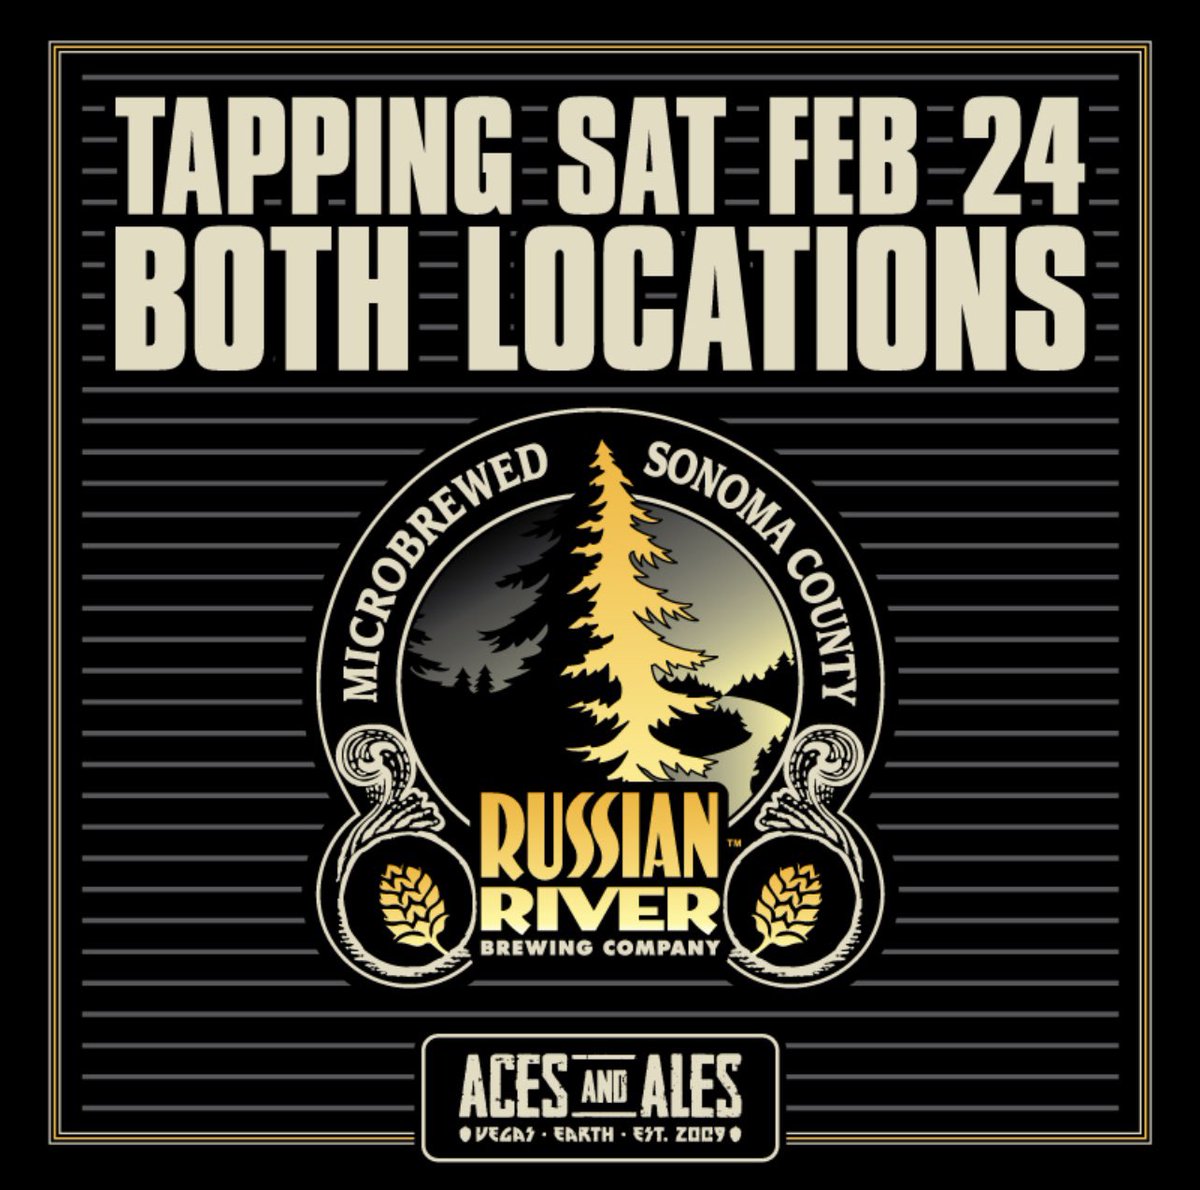 🍺 Today is the Day! 🍺

Join us at #acesandales as we roll out the @RussianRiverBC 

Get here NOW!

#russianriver #russianriverbrewery #acesandalestenaya #lasvegasnellis #vegas #lasvegas #craftbeer #lasvegascraftbeer #restaurant #beer #food #fun #beertapping